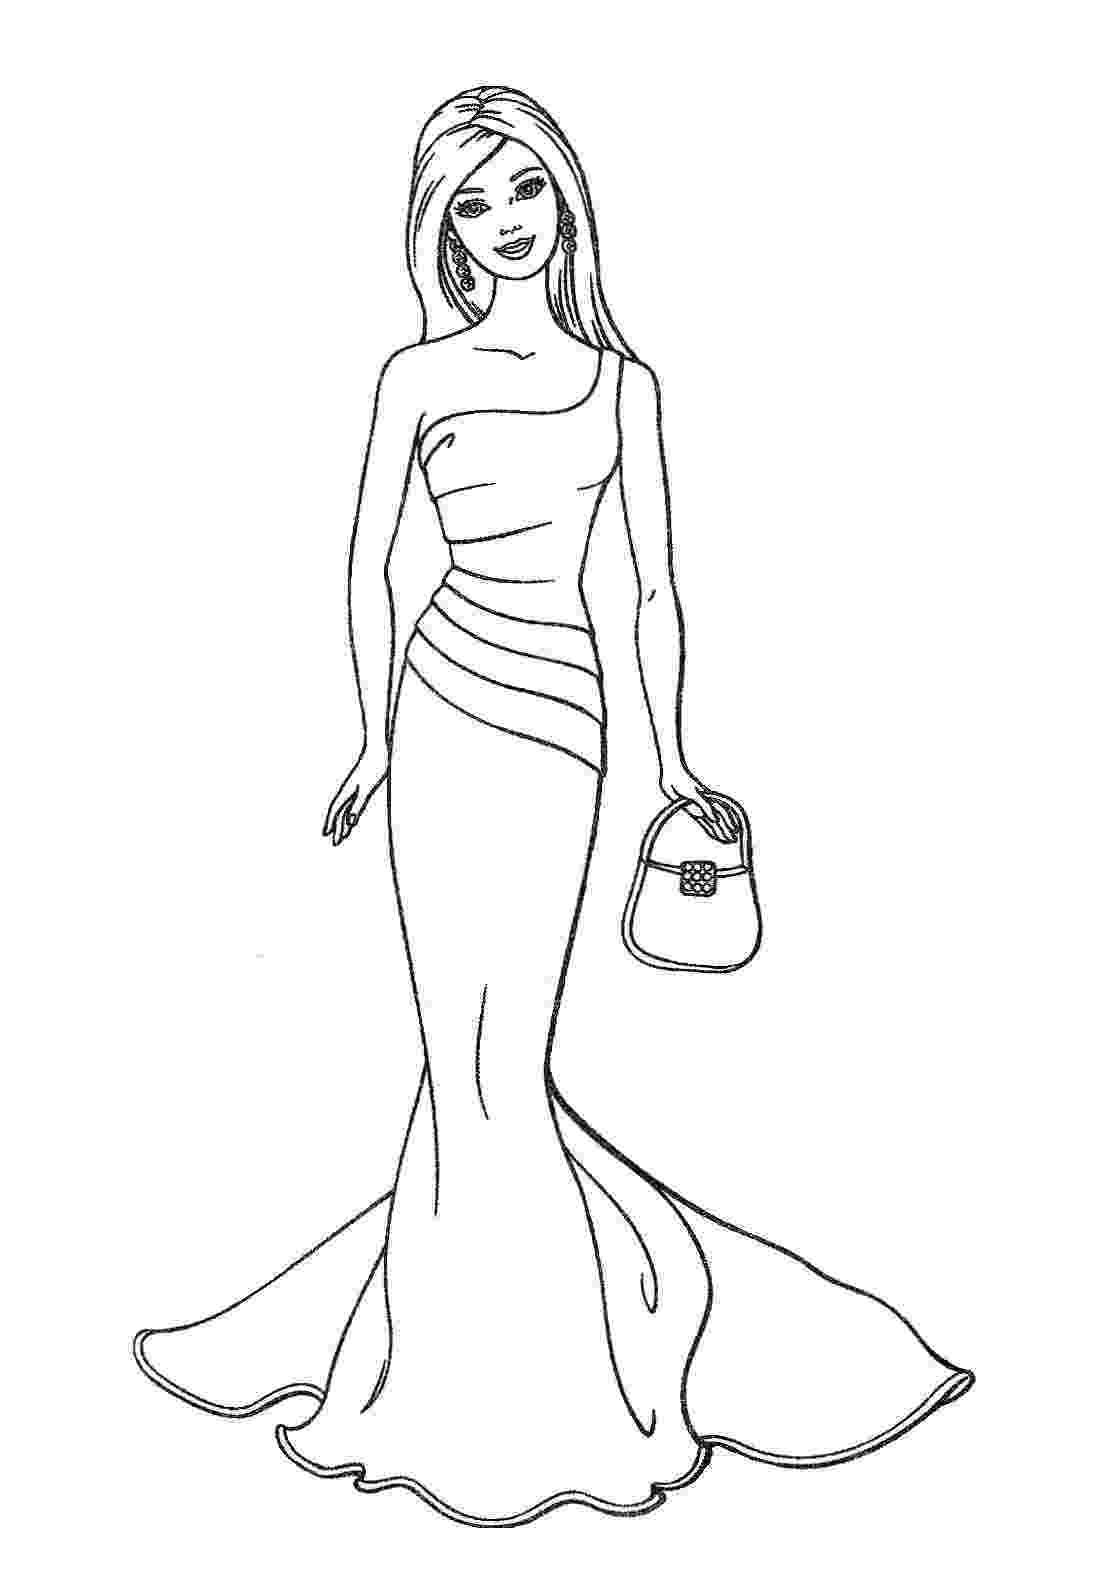 barbie doll pictures to color barbie coloring pages coloring pages of barbie with kelly pictures barbie doll to color 